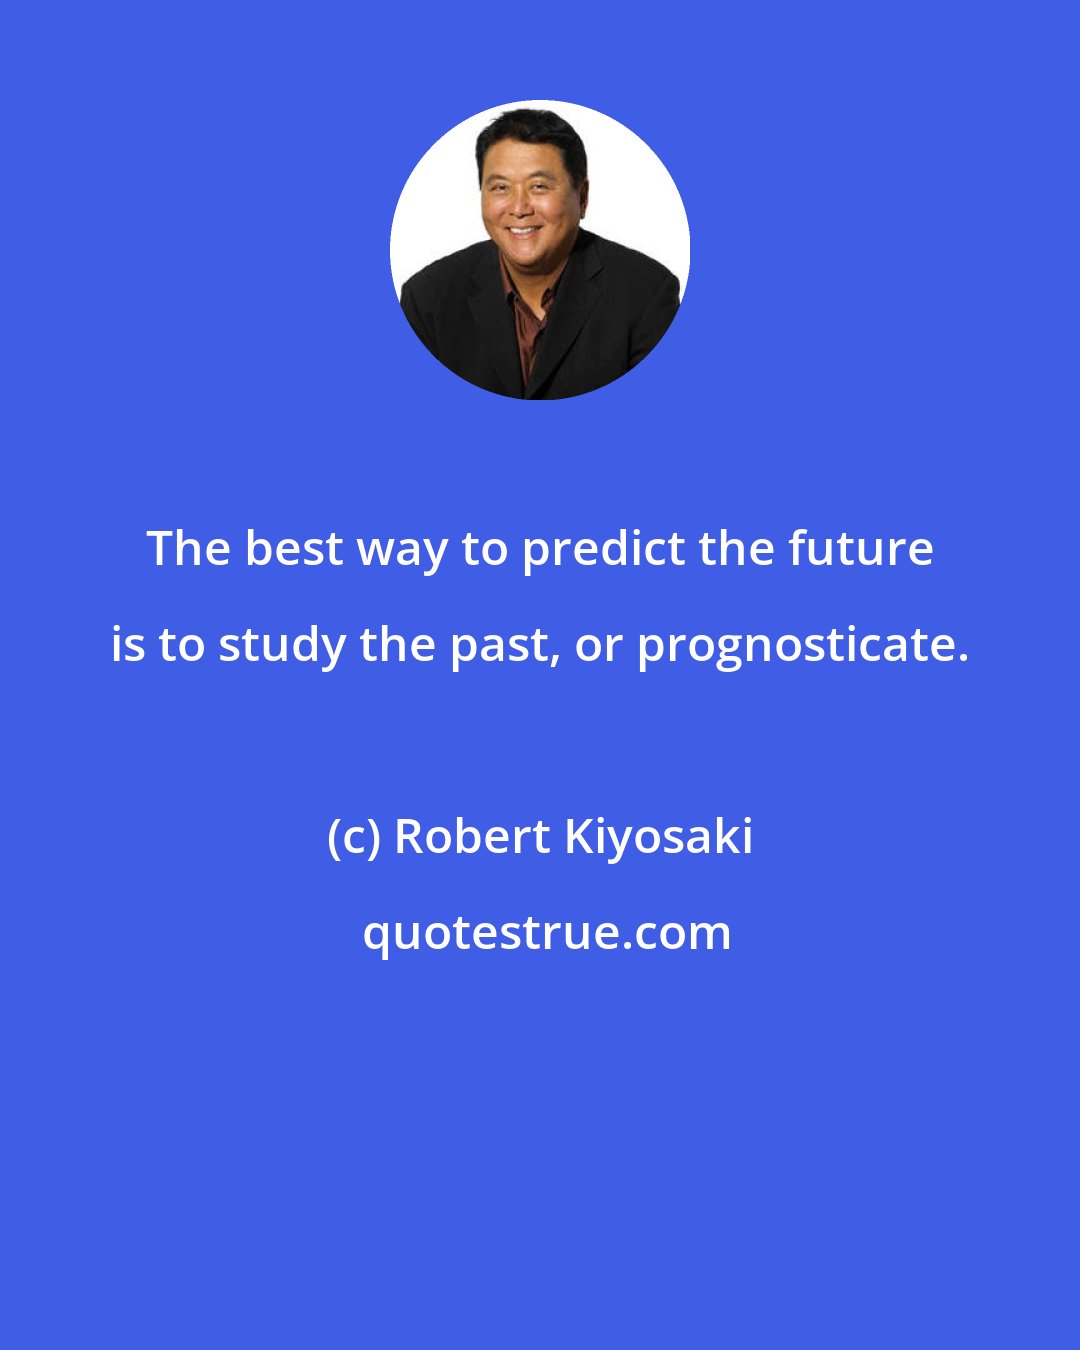 Robert Kiyosaki: The best way to predict the future is to study the past, or prognosticate.